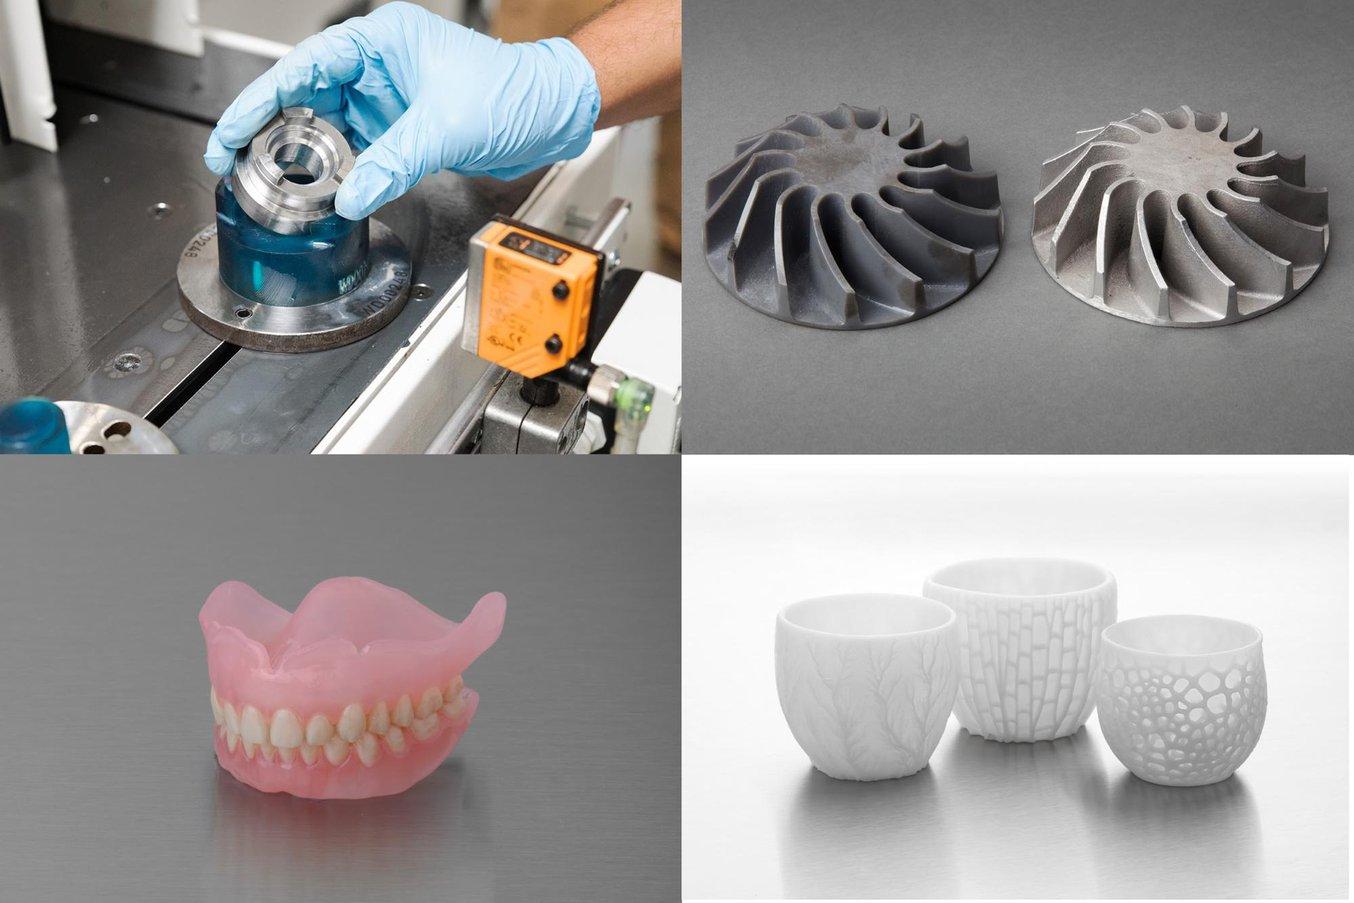 Four parts produced using the same SLA 3D printer. From top left to bottom right: a fixture in an automated production line at an automotive factory; a metal part casted using a 3D printed pattern; a biocompatible denture; and ceramic tableware.